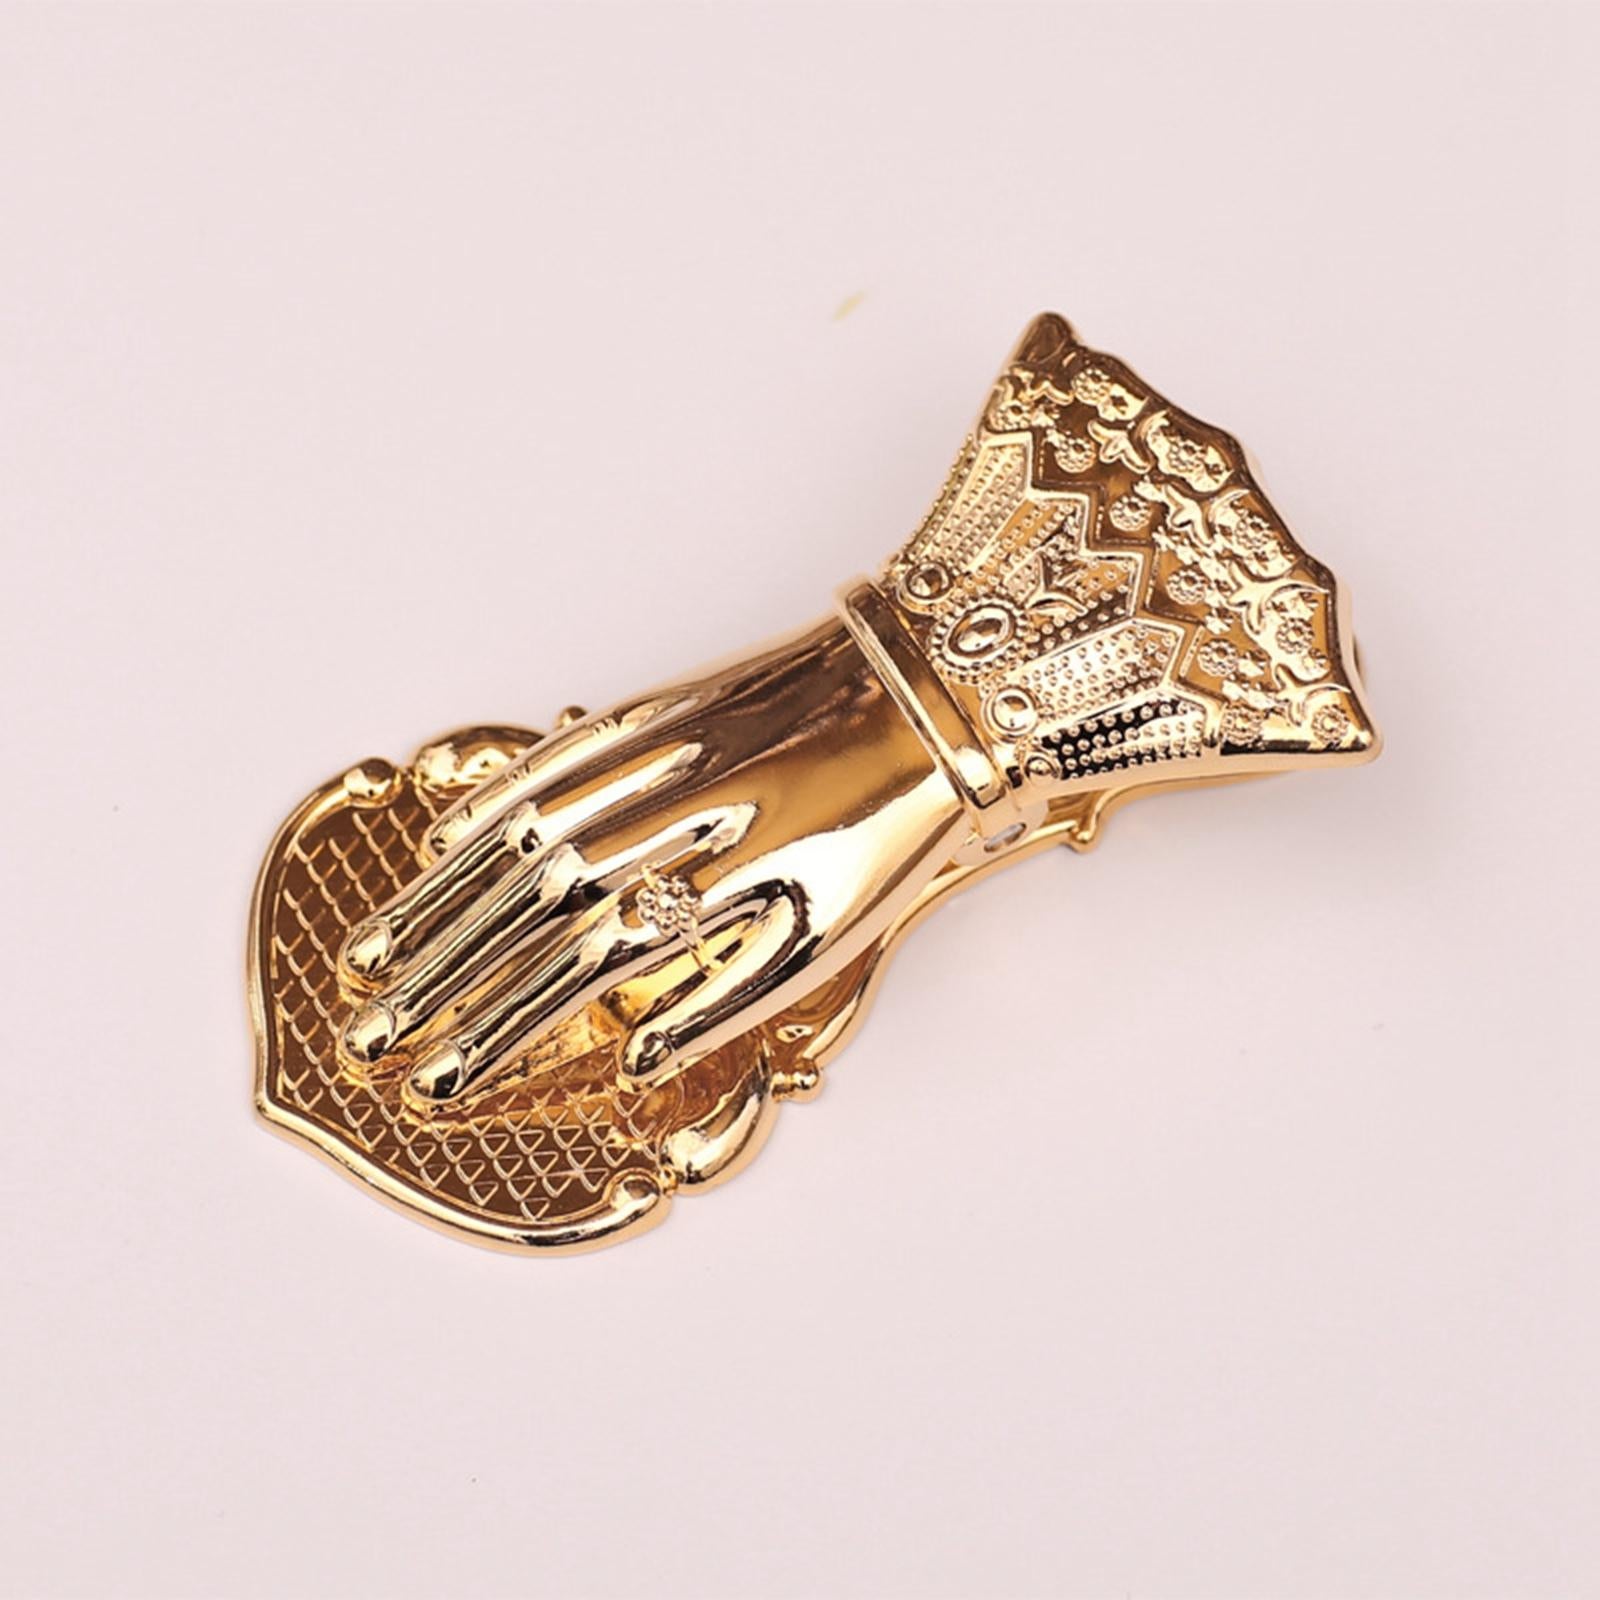 Noblewoman Hand Clip Utility Handmade Craft Gold Letter for Invoices Letters